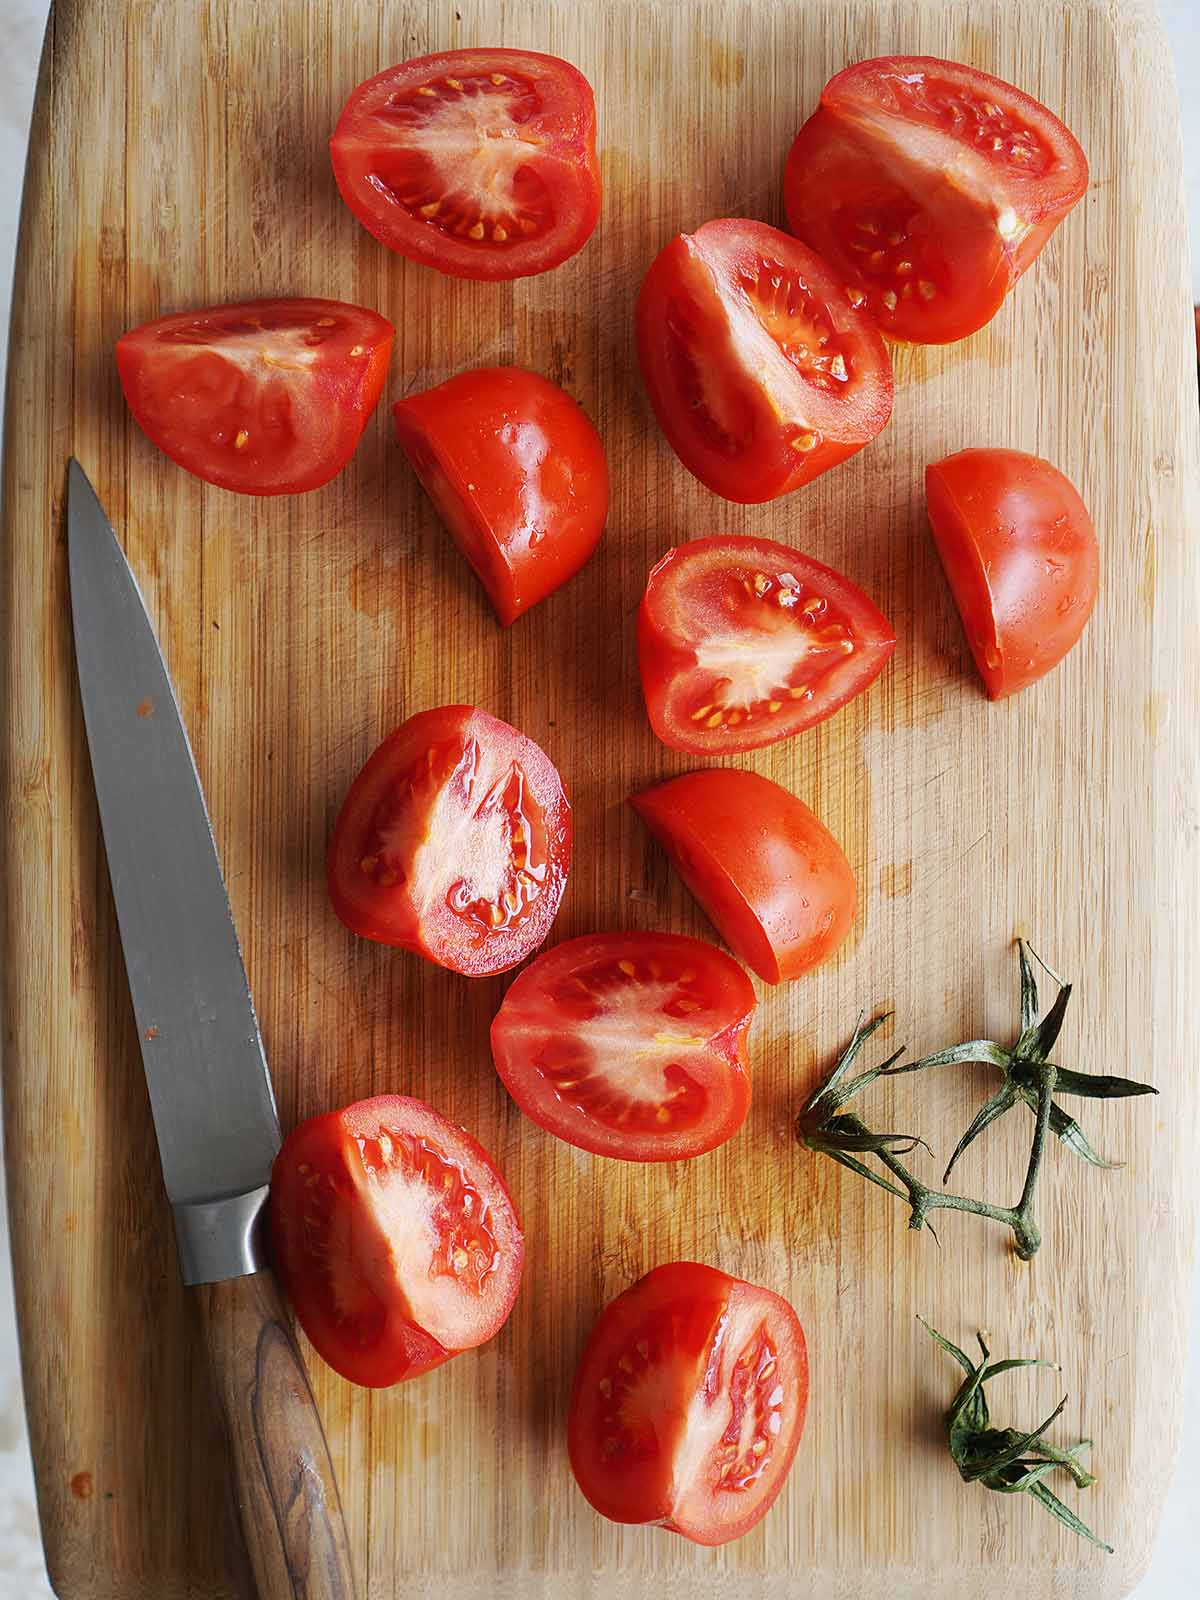 Chopped tomatoes on a cutting board.